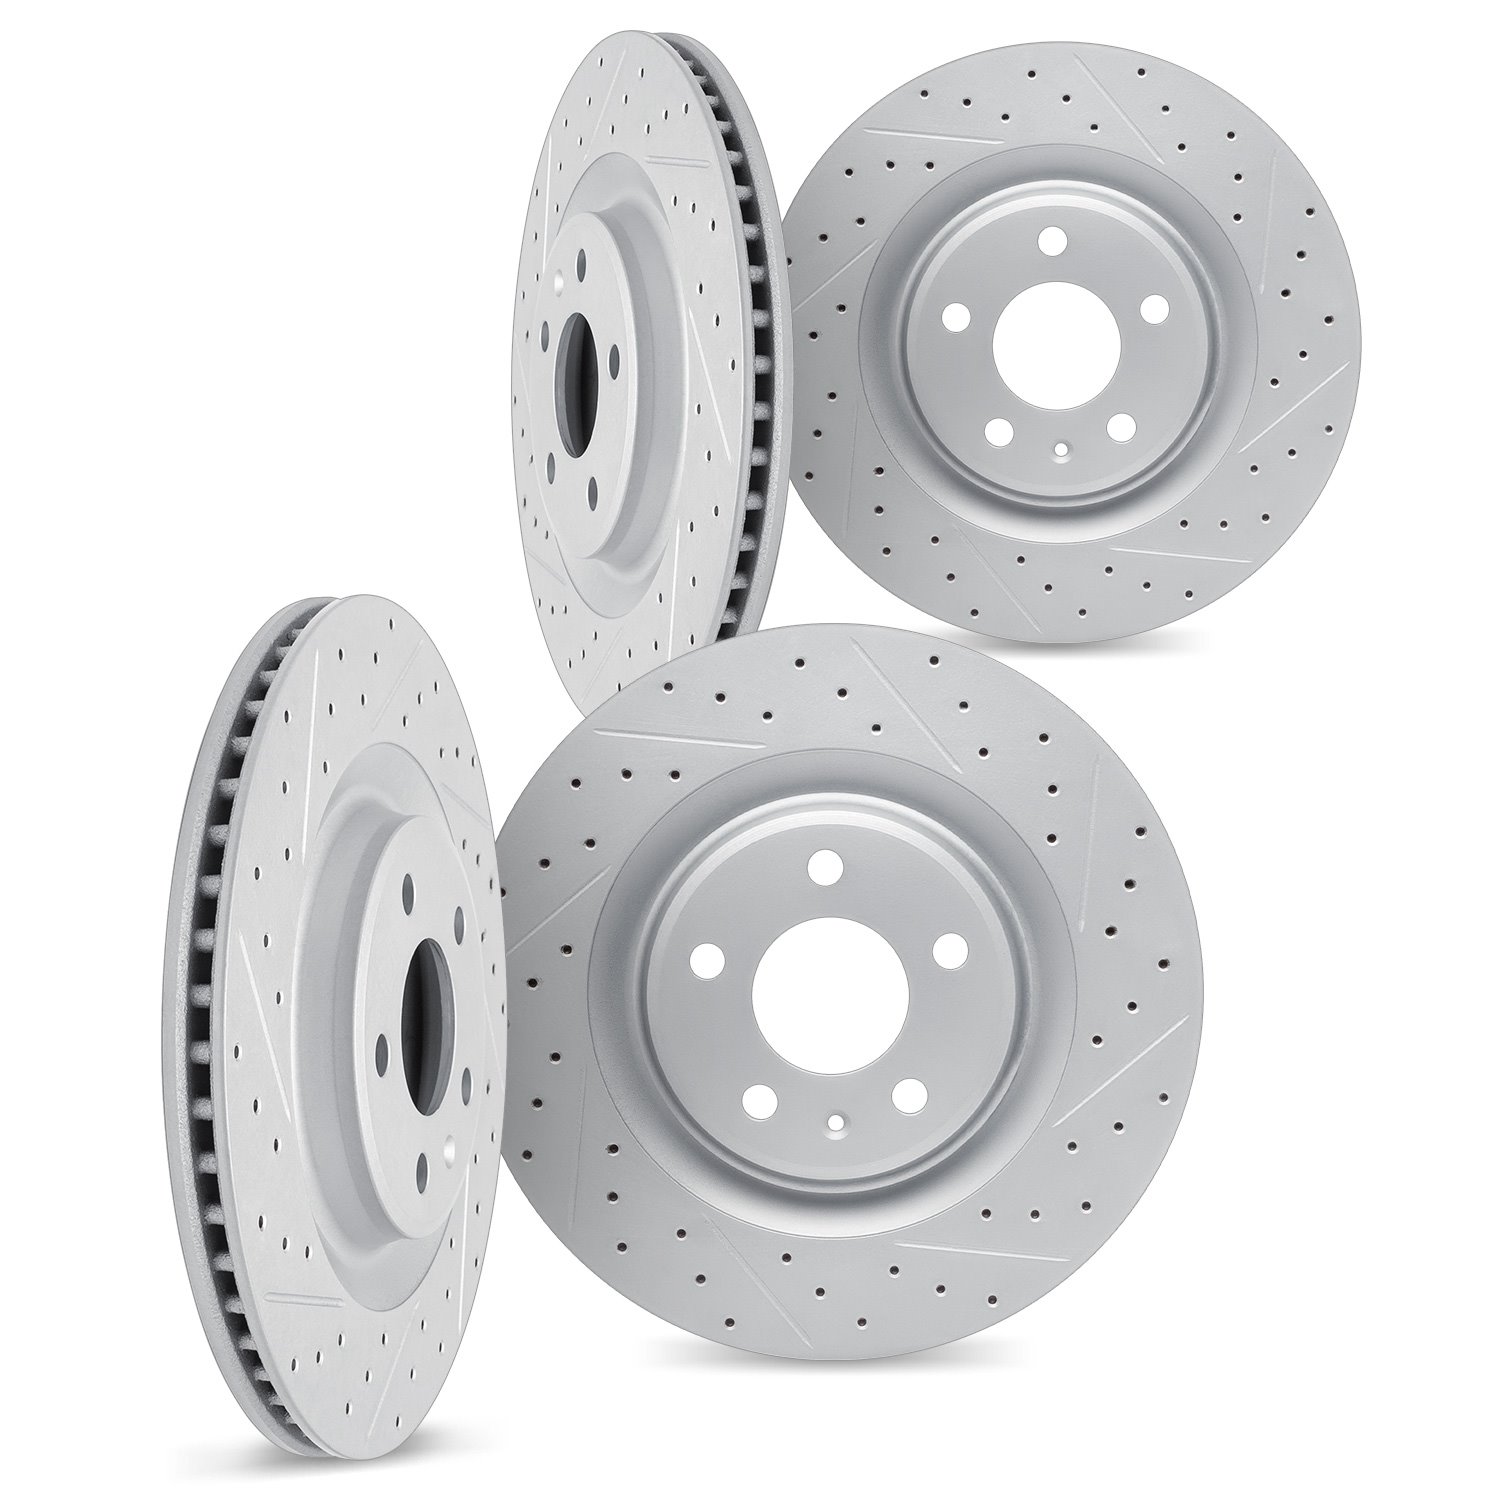 2004-46030 Geoperformance Dimpled & Slotted Brake Rotors, 2011-2017 GM, Position: Front and Rear